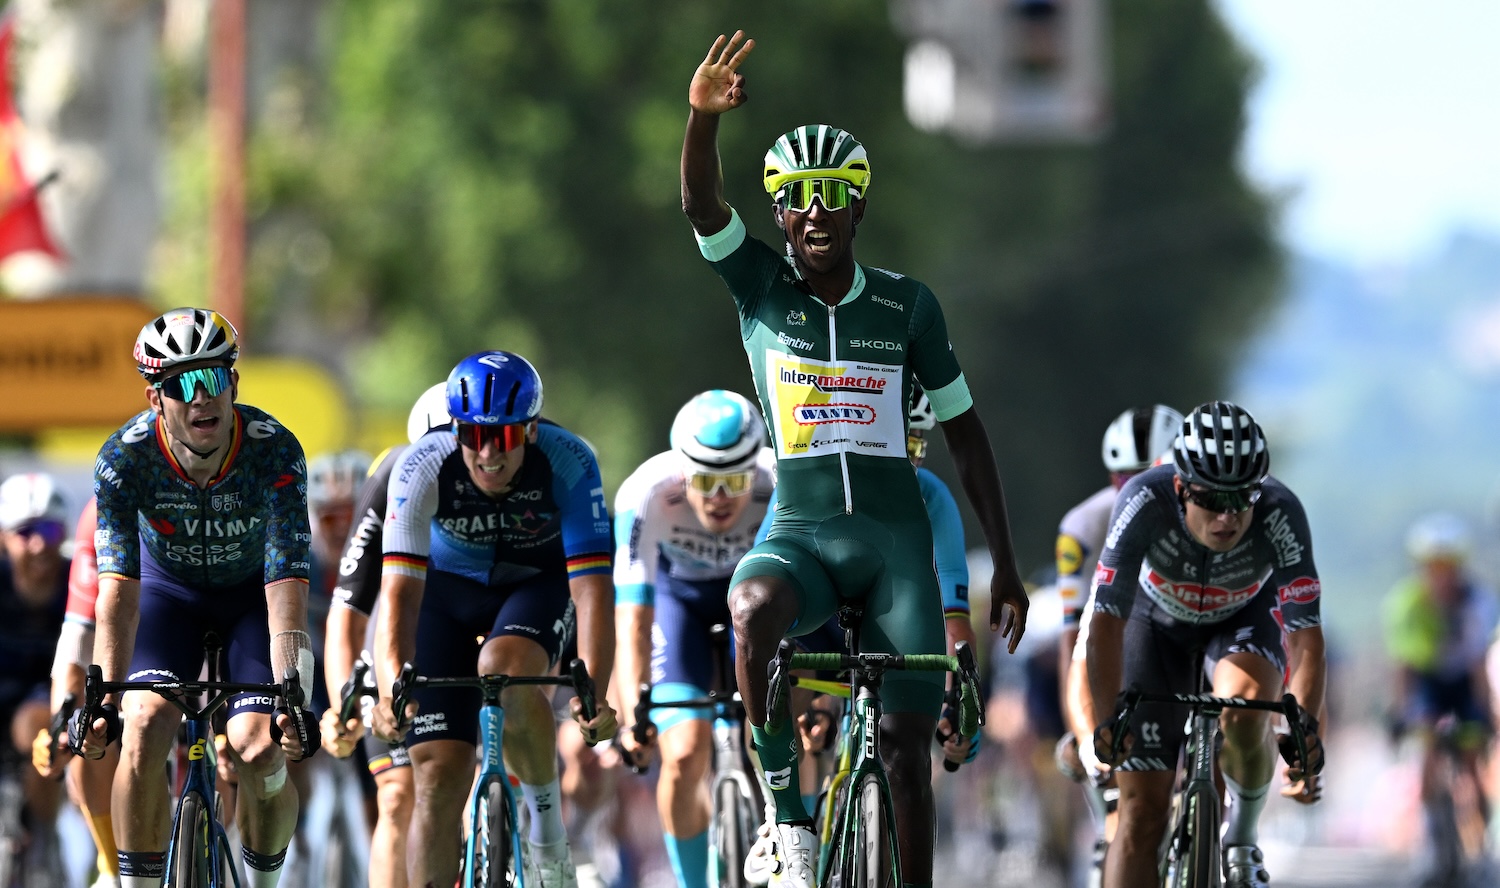 VILLENEUVE-SUR-LOT, FRANCE - JULY 11: (EDITOR'S NOTE: Alternate crop) Biniam Girmay of Eritrea and Team Intermarche - Wanty - Green Sprint Jersey celebrates at finish line as stage winner ahead of (L-R) Wout Van Aert of Belgium and Team Visma | Lease a Bike, Pascal Ackermann of Germany and Team Israel - Premier Tech and Jasper Philipsen of Belgium and Team Alpecin - Deceuninck during the 111th Tour de France 2024, Stage 12 a 203.6km stage from Aurillac to Villeneuve-sur-Lot / #UCIWT / on July 11, 2024 in Villeneuve-sur-Lot, France. (Photo by Tim de Waele/Getty Images)